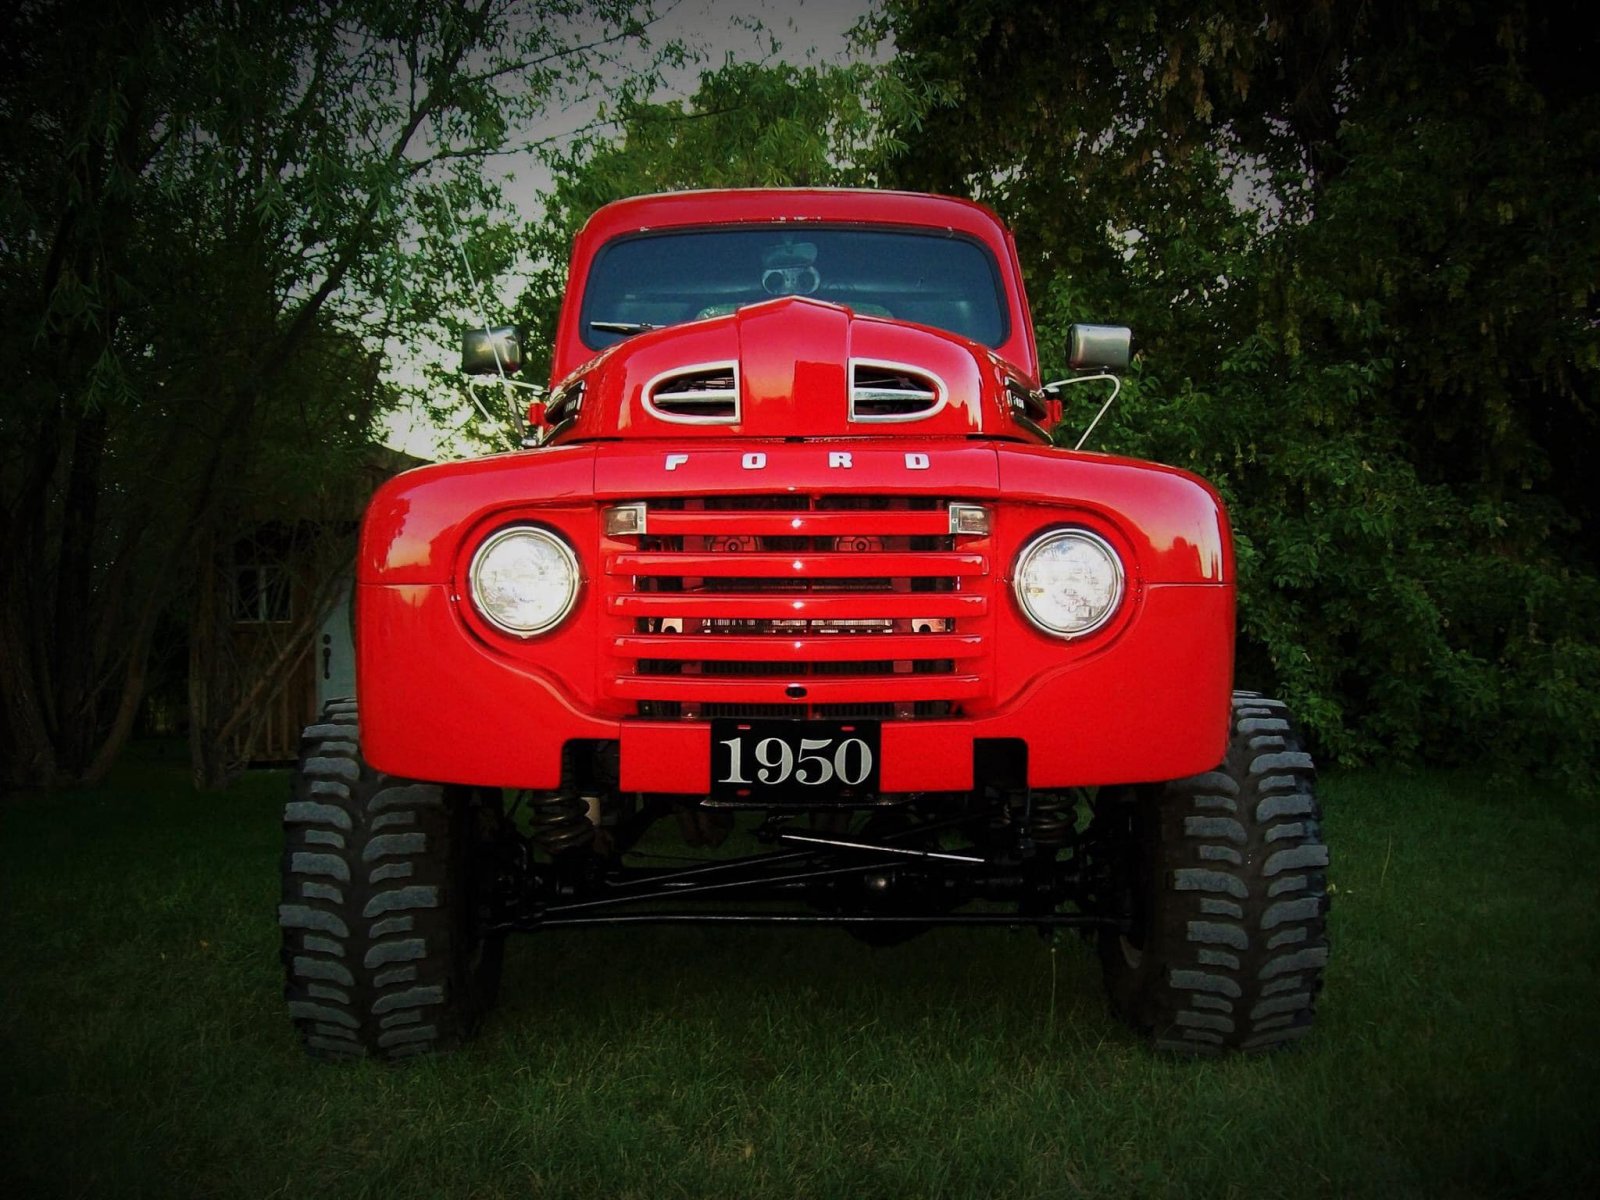 1950 Ford F1 4x4 Indian Motorcycle Tribute Truck | Ford Daily Trucks